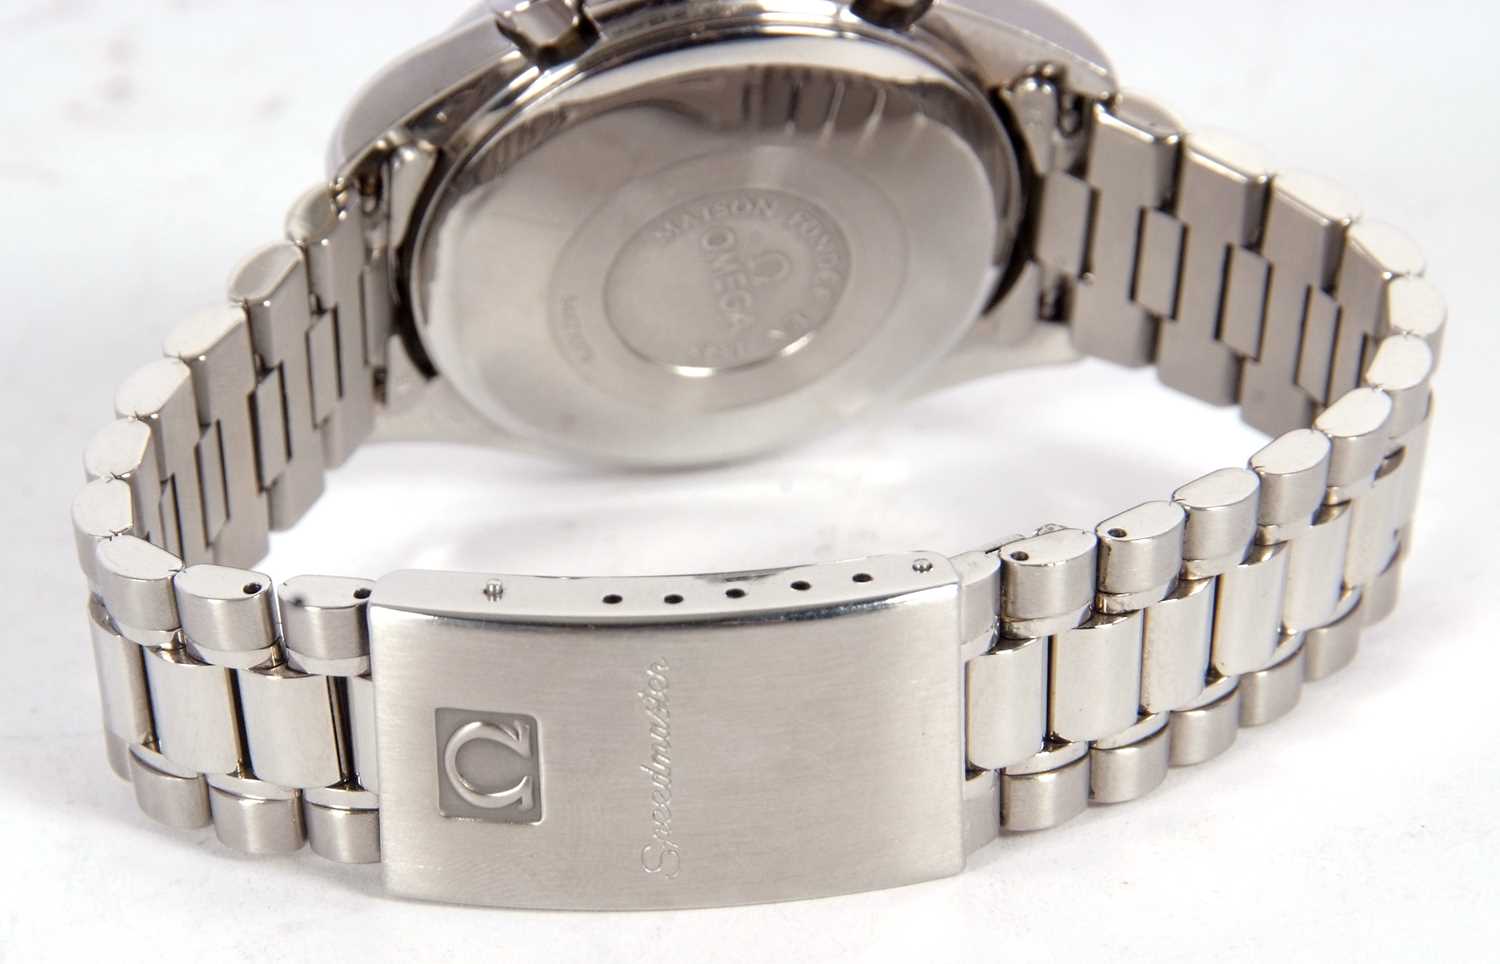 An Omega Seamaster Triple Date automatic gents wristwatch, the watch has a stainless steel case - Image 3 of 7